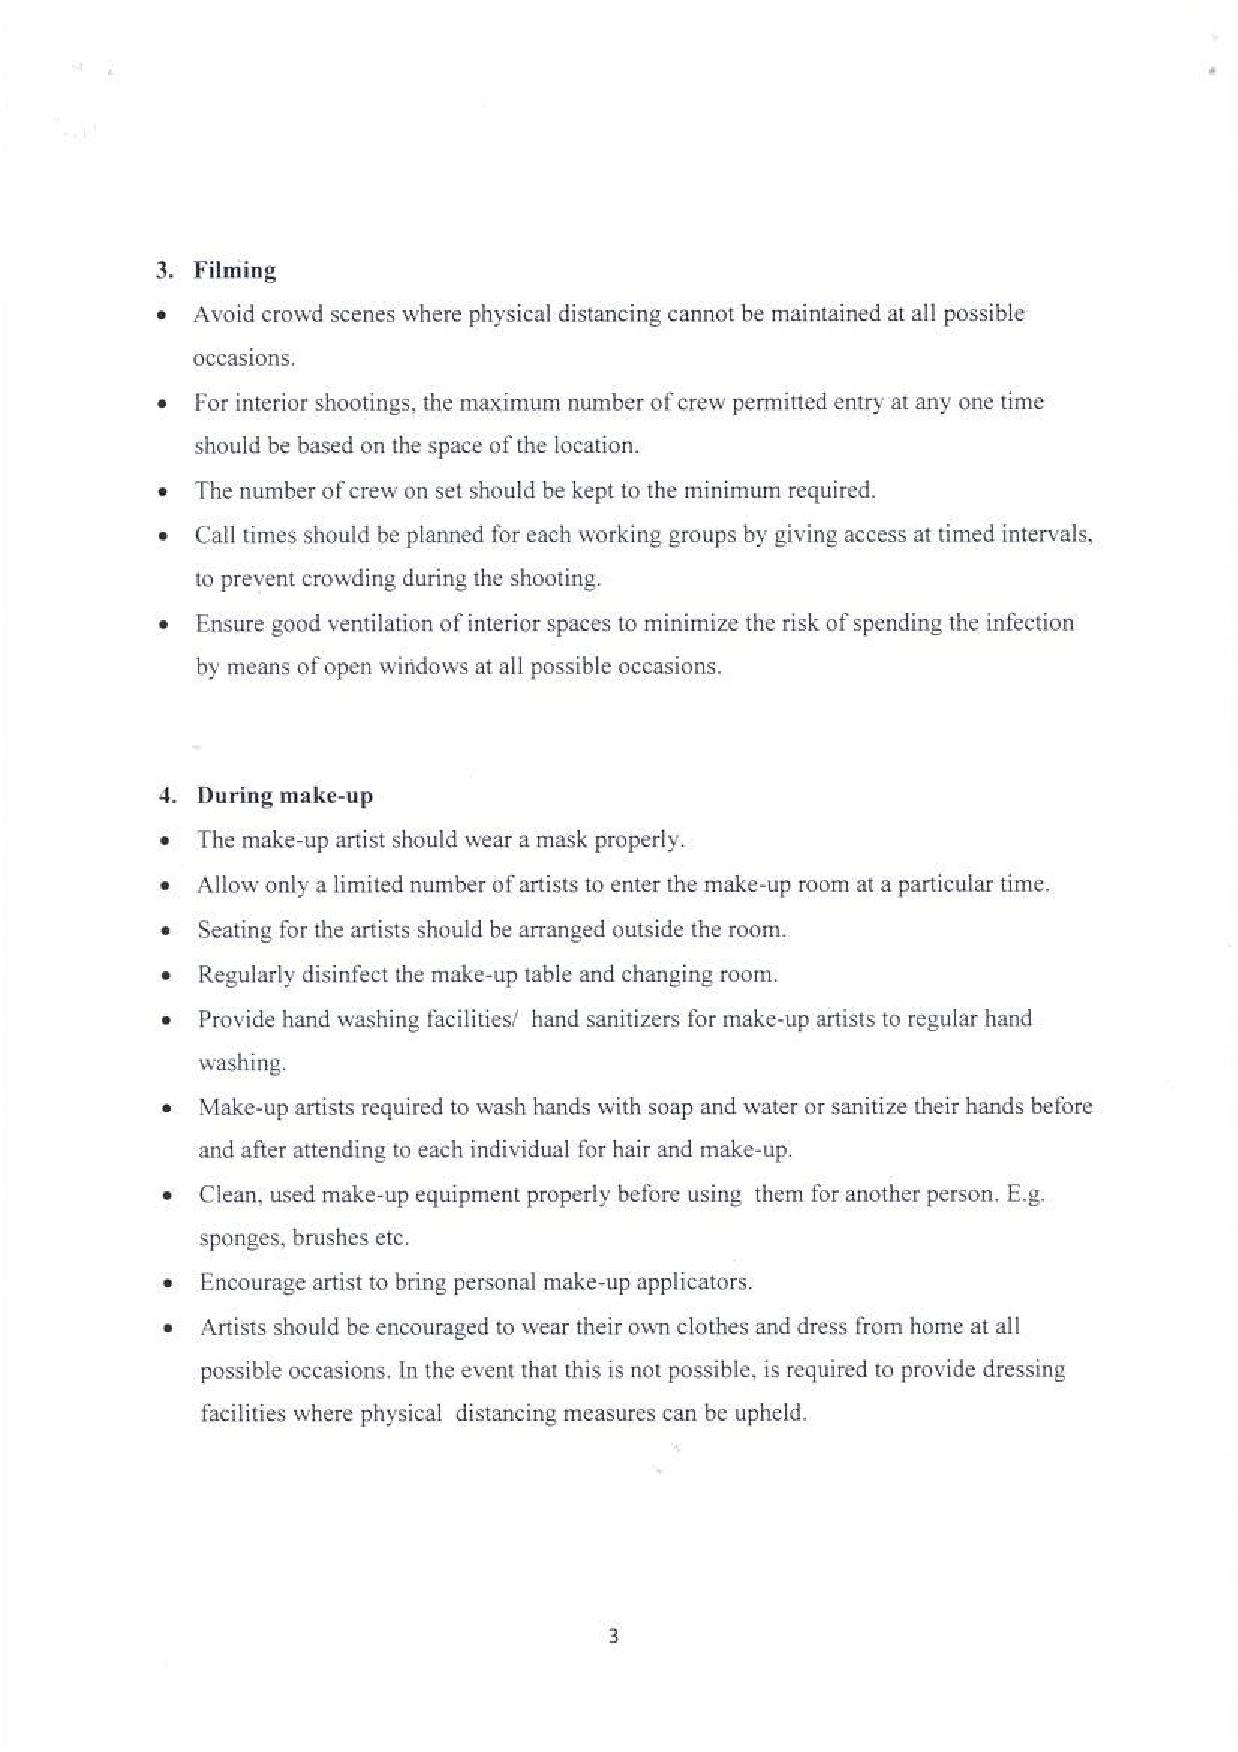 Guideline for Film and Teledrama Industry page 005